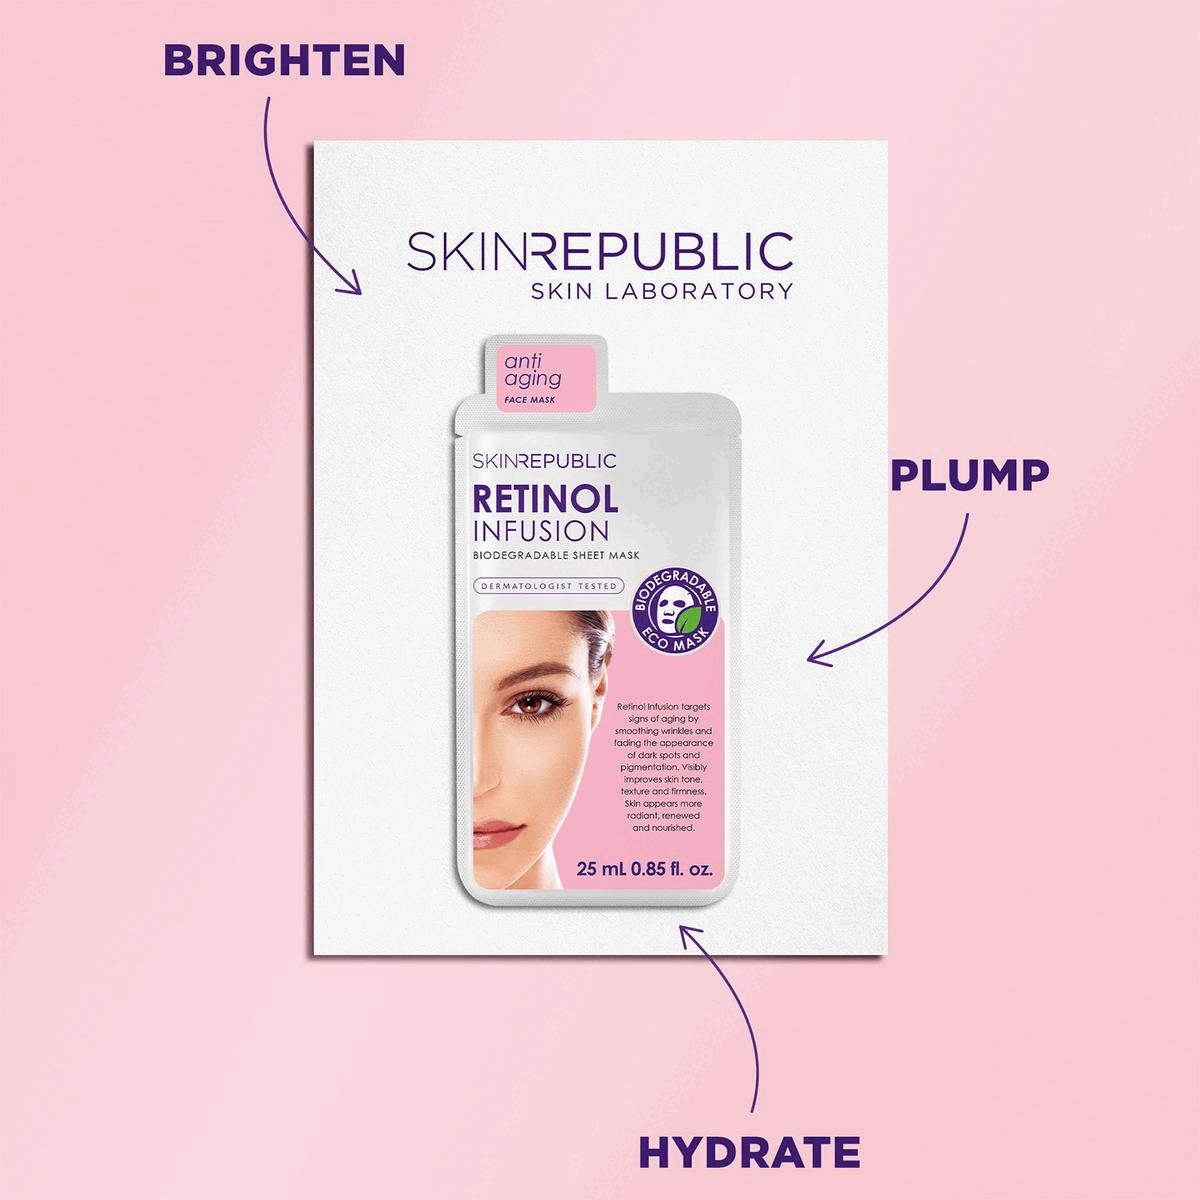 Image 1, brighten, plump, hydrate Image 2, biodegradable mask and pack, vegetarian friendly